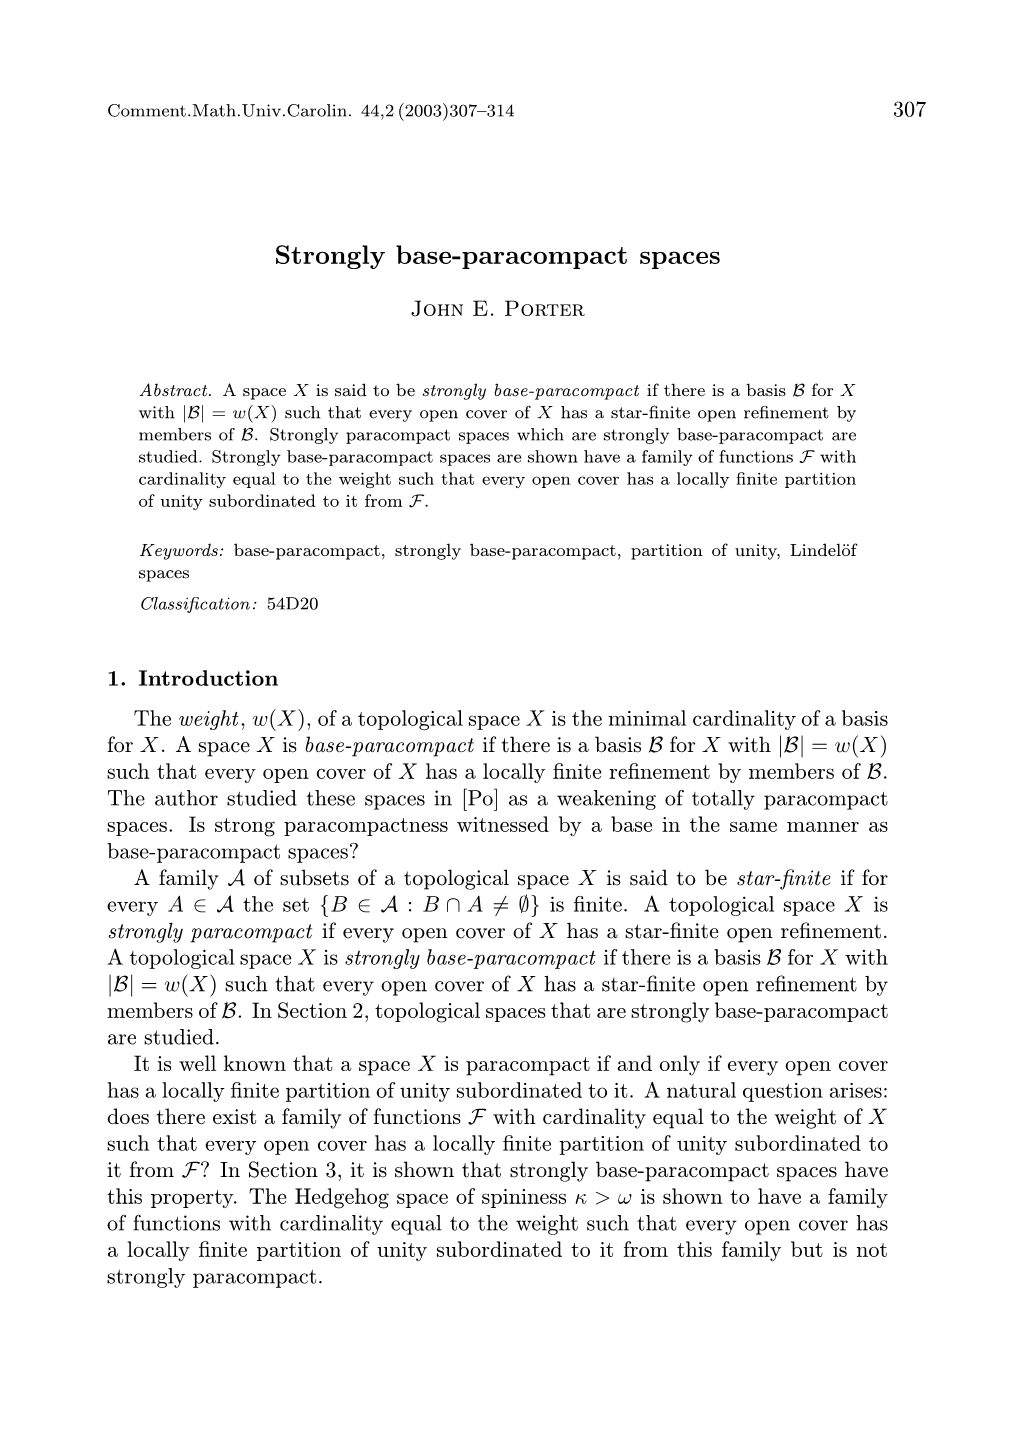 Strongly Base-Paracompact Spaces